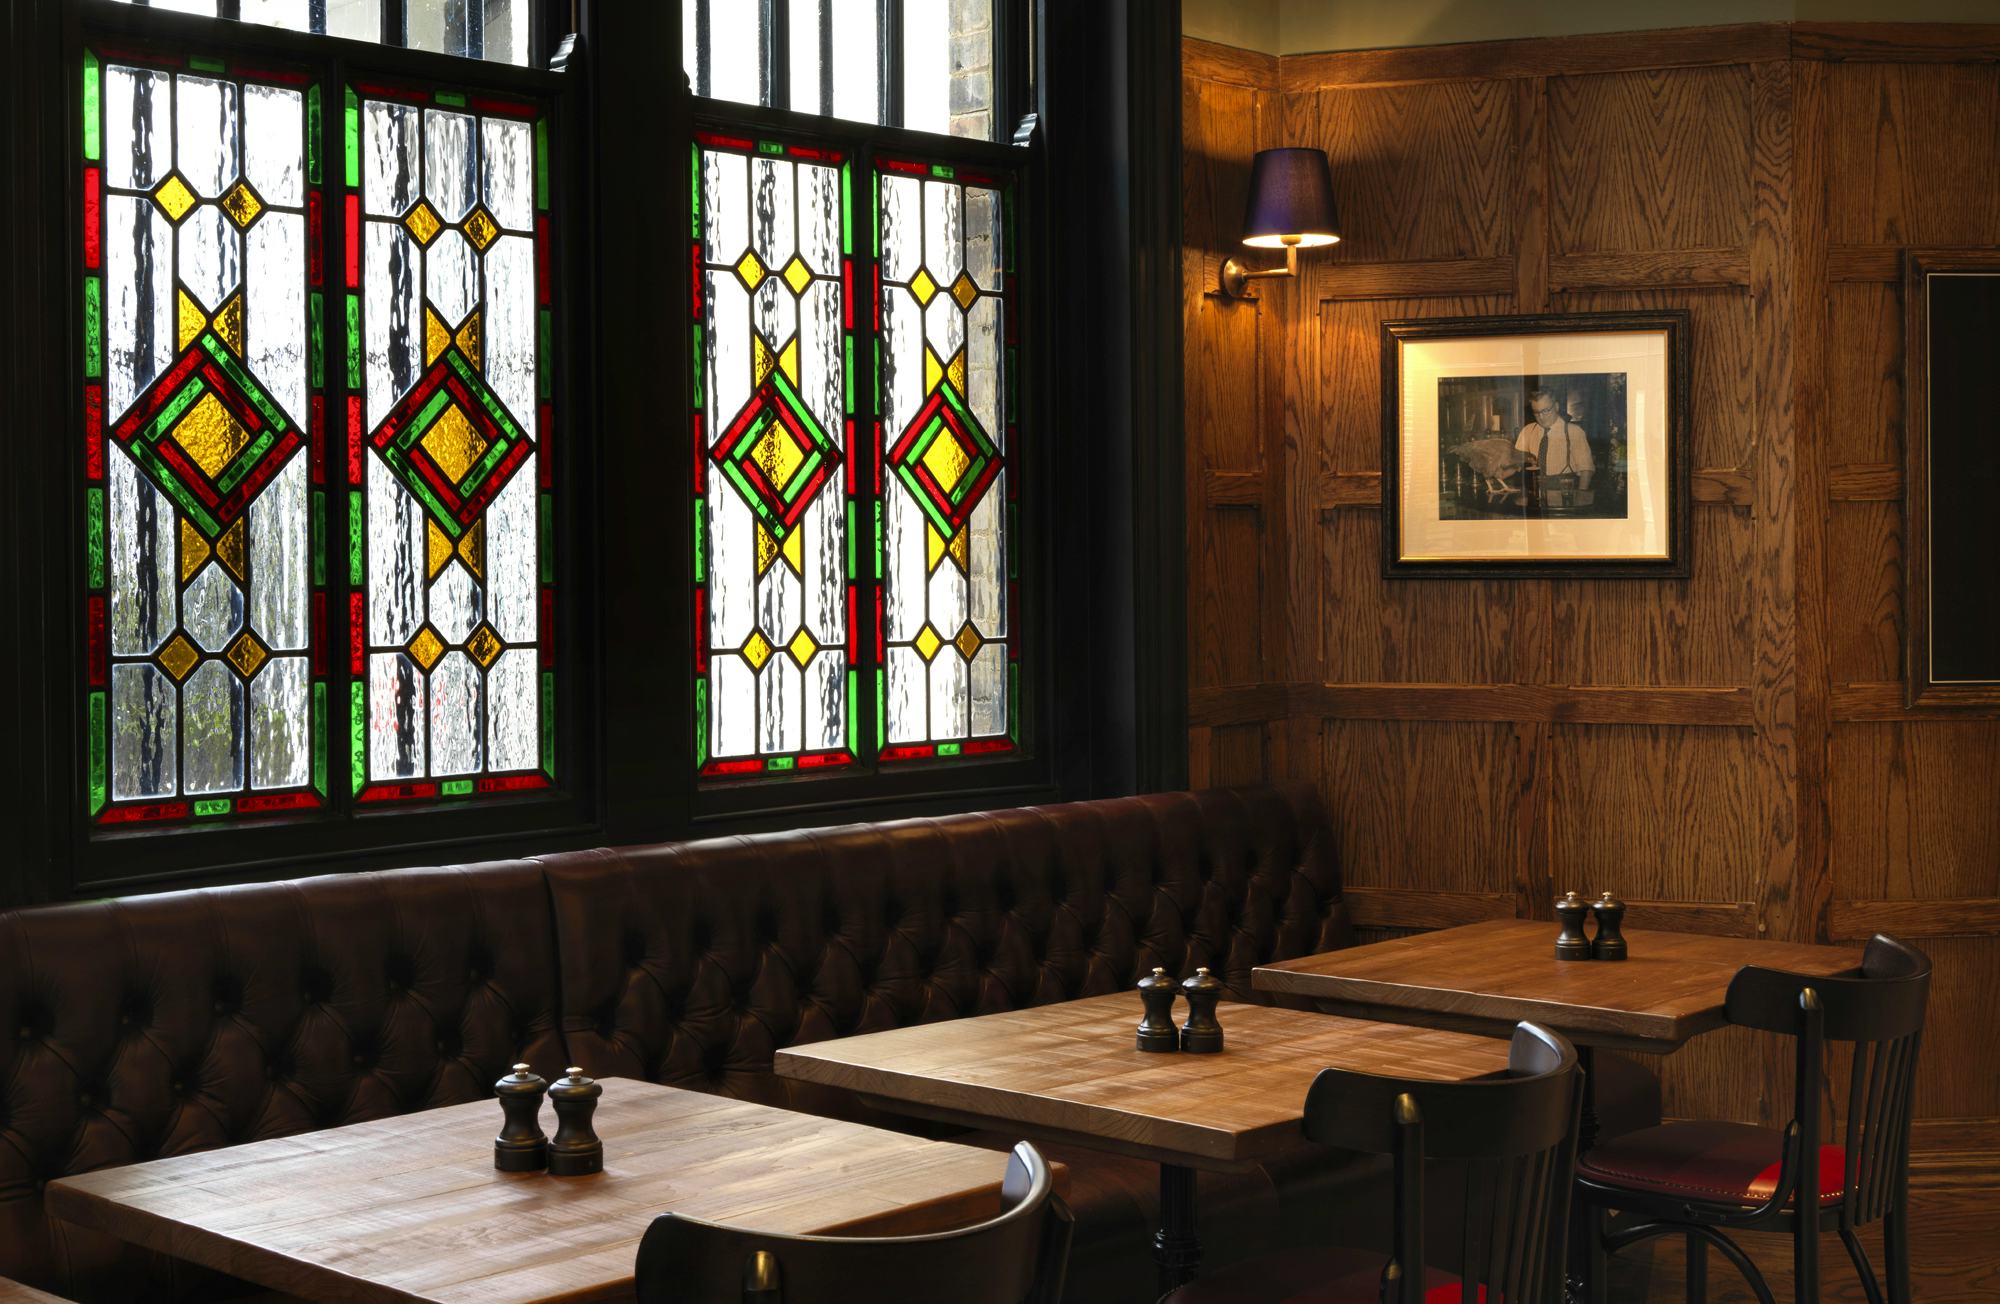 The Coach Clerkenwell pubs restaurants stained glass windows seating dining beer ales